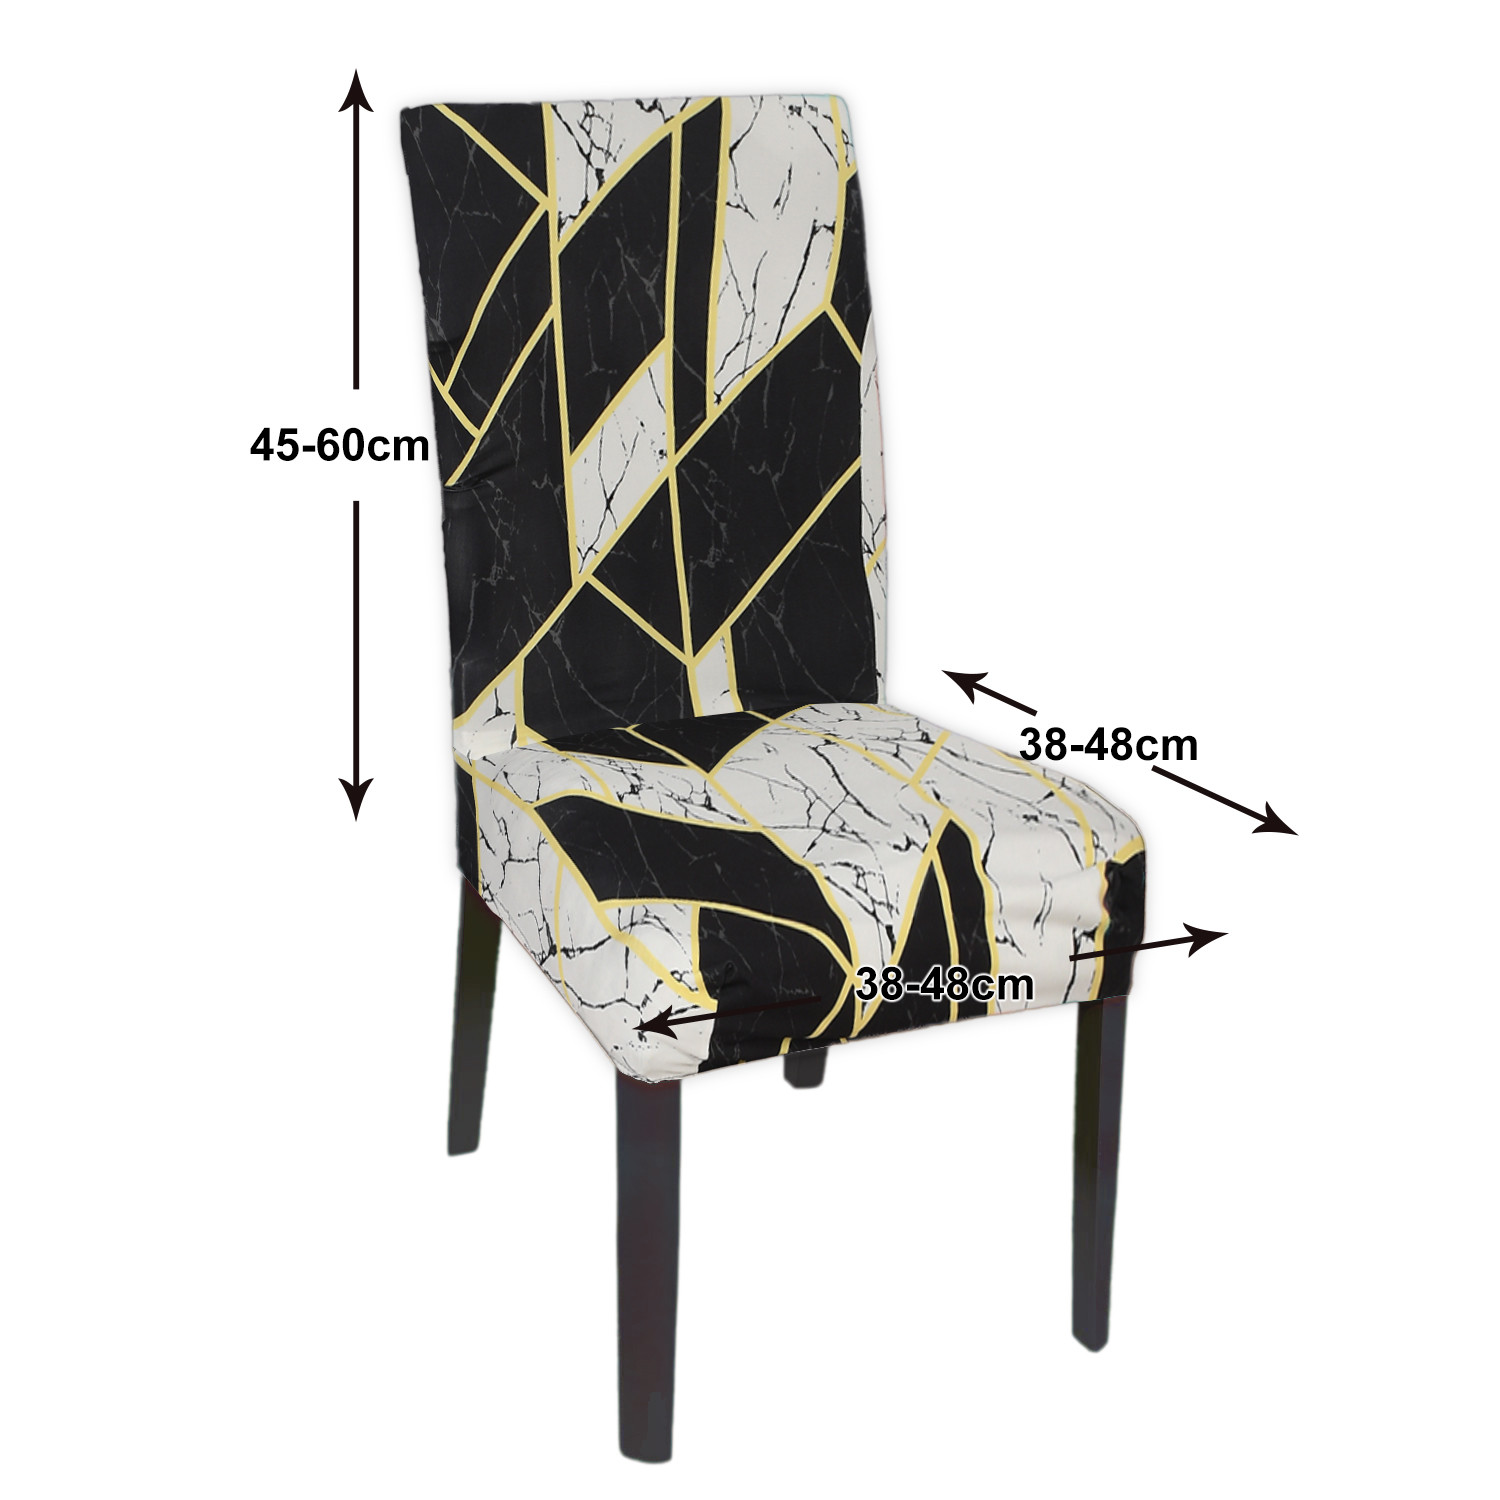 Kuber Industries Multicheck Print Elastic Stretchable Polyester Chair Cover For Home, Office, Hotels, Wedding Banquet (Black) 54KM4331